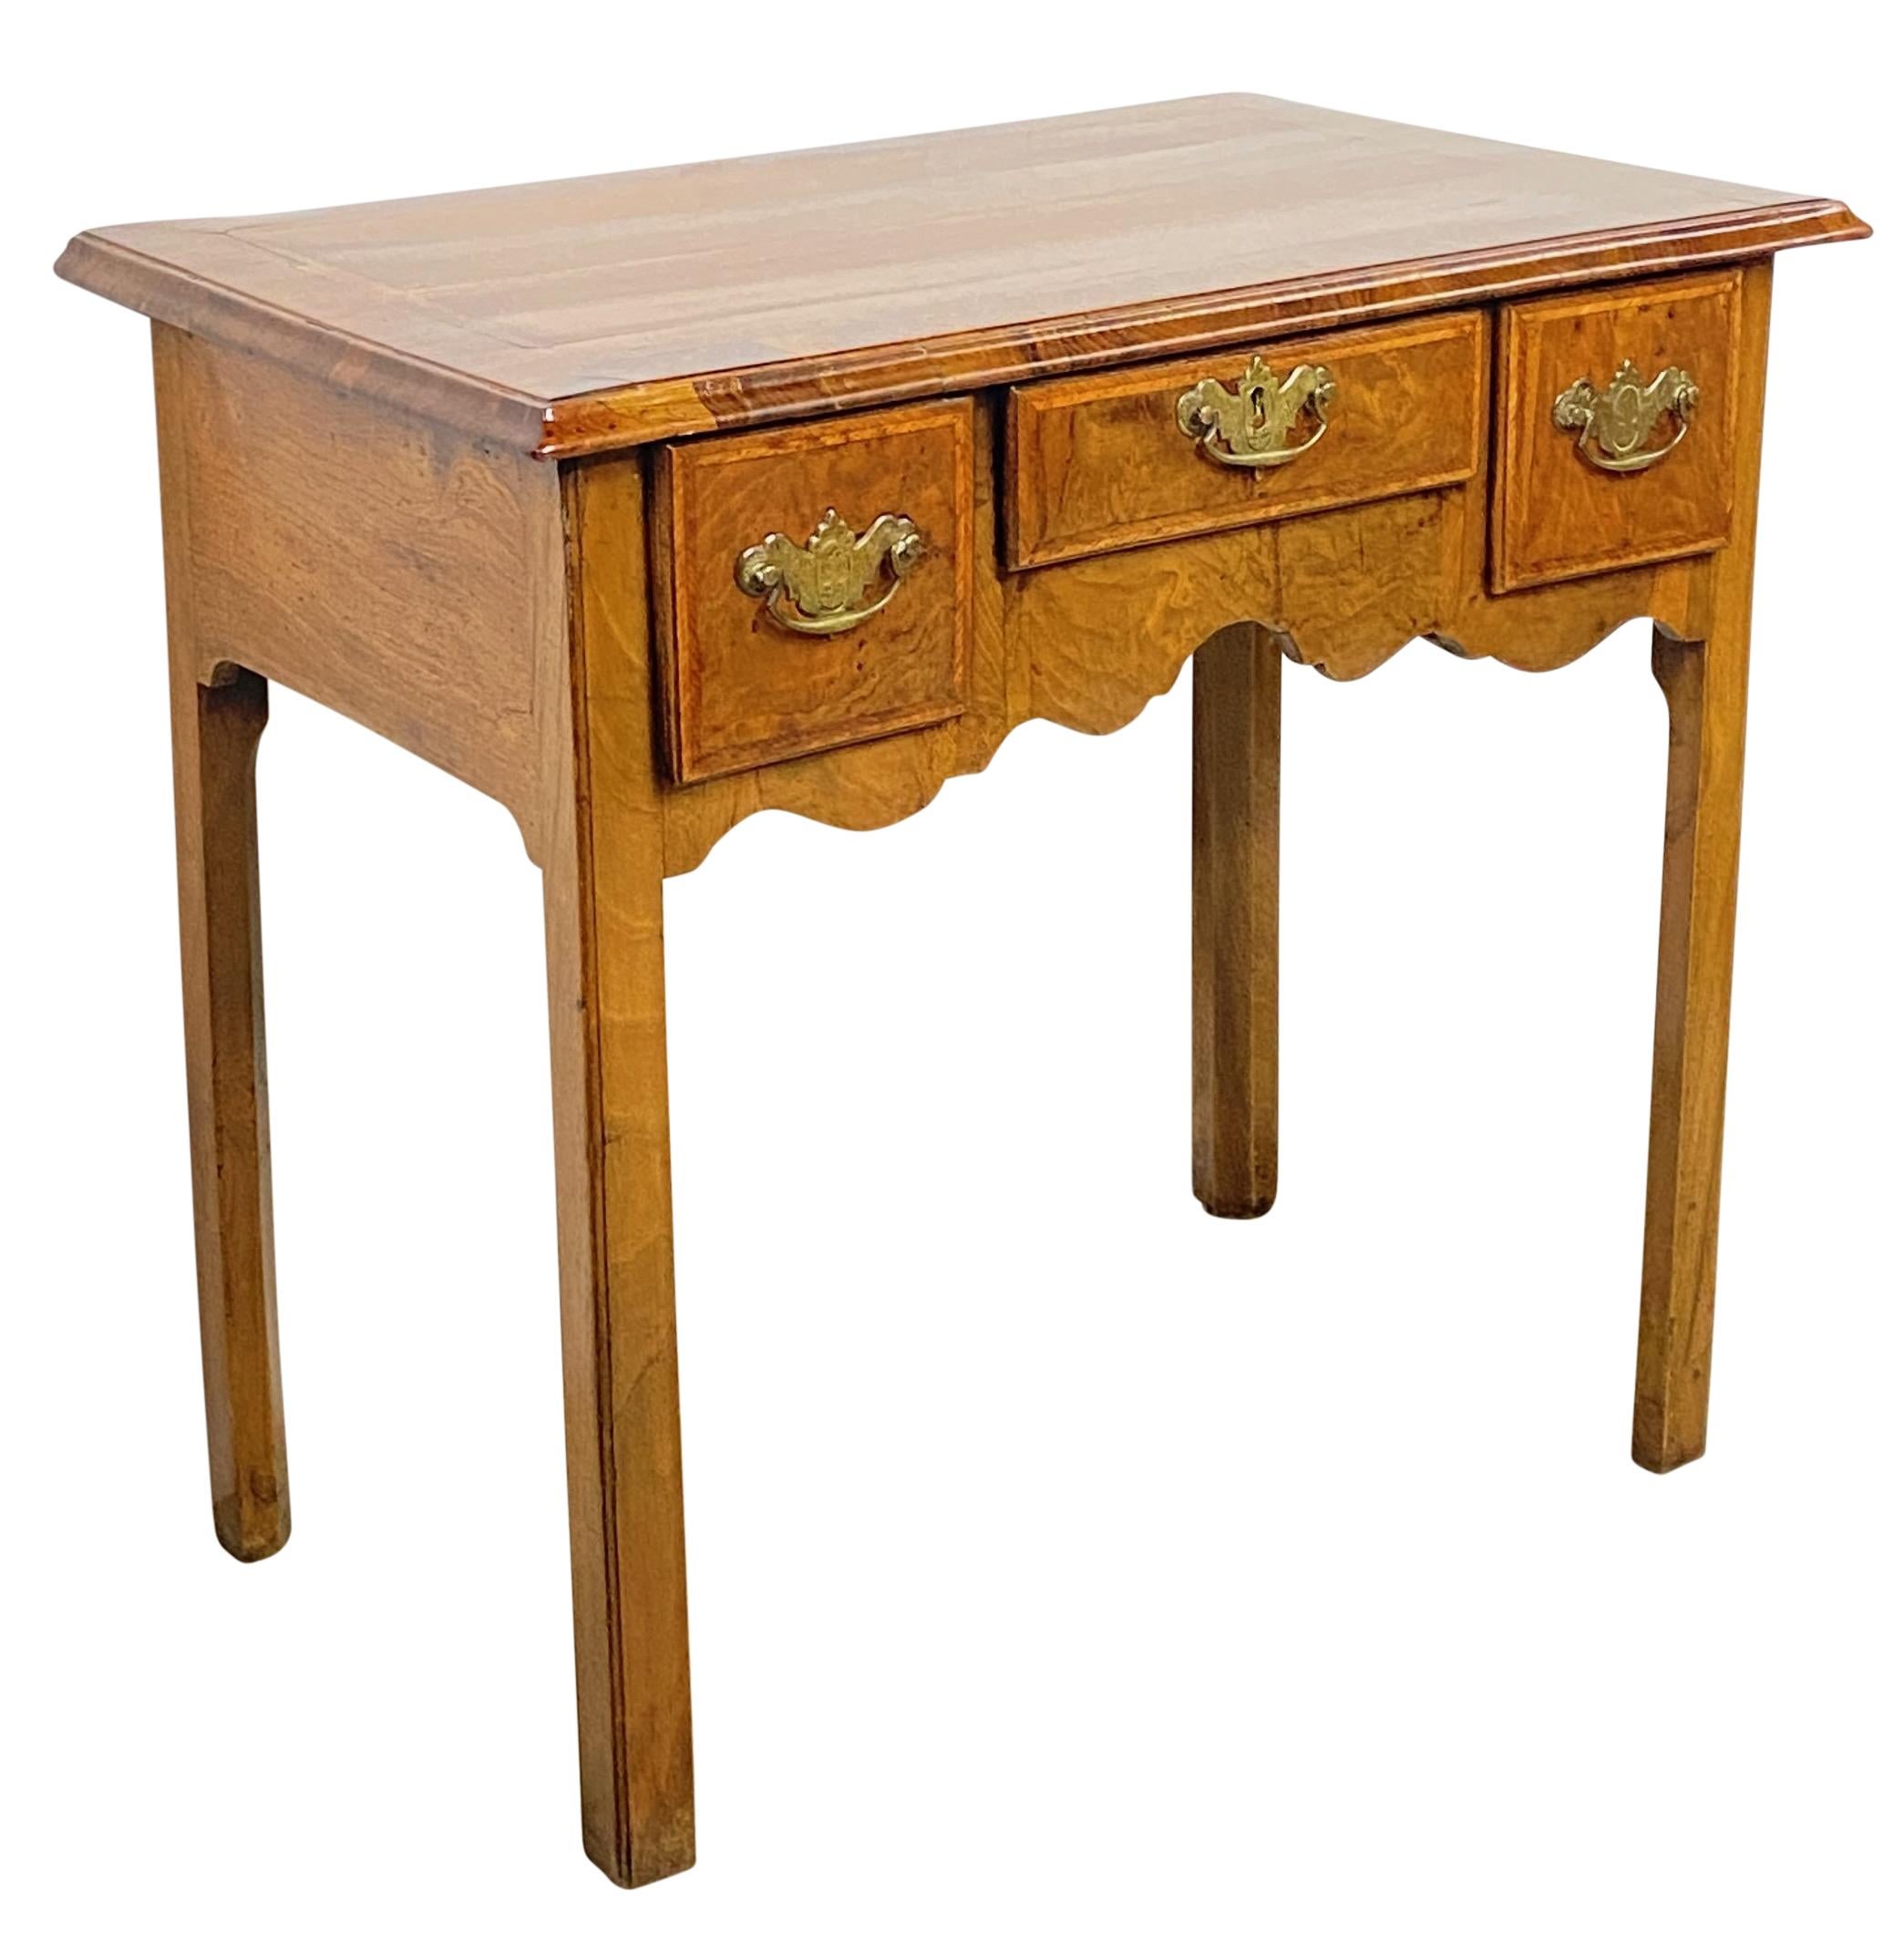 An attractive English walnut writing table or dressing table with brass hardware.
Solid walnut and walnut veneer over solid oak secondary wood. 
Having burl walnut drawer fronts with herringbone banding. 
In excellent antique condition.
England, mid